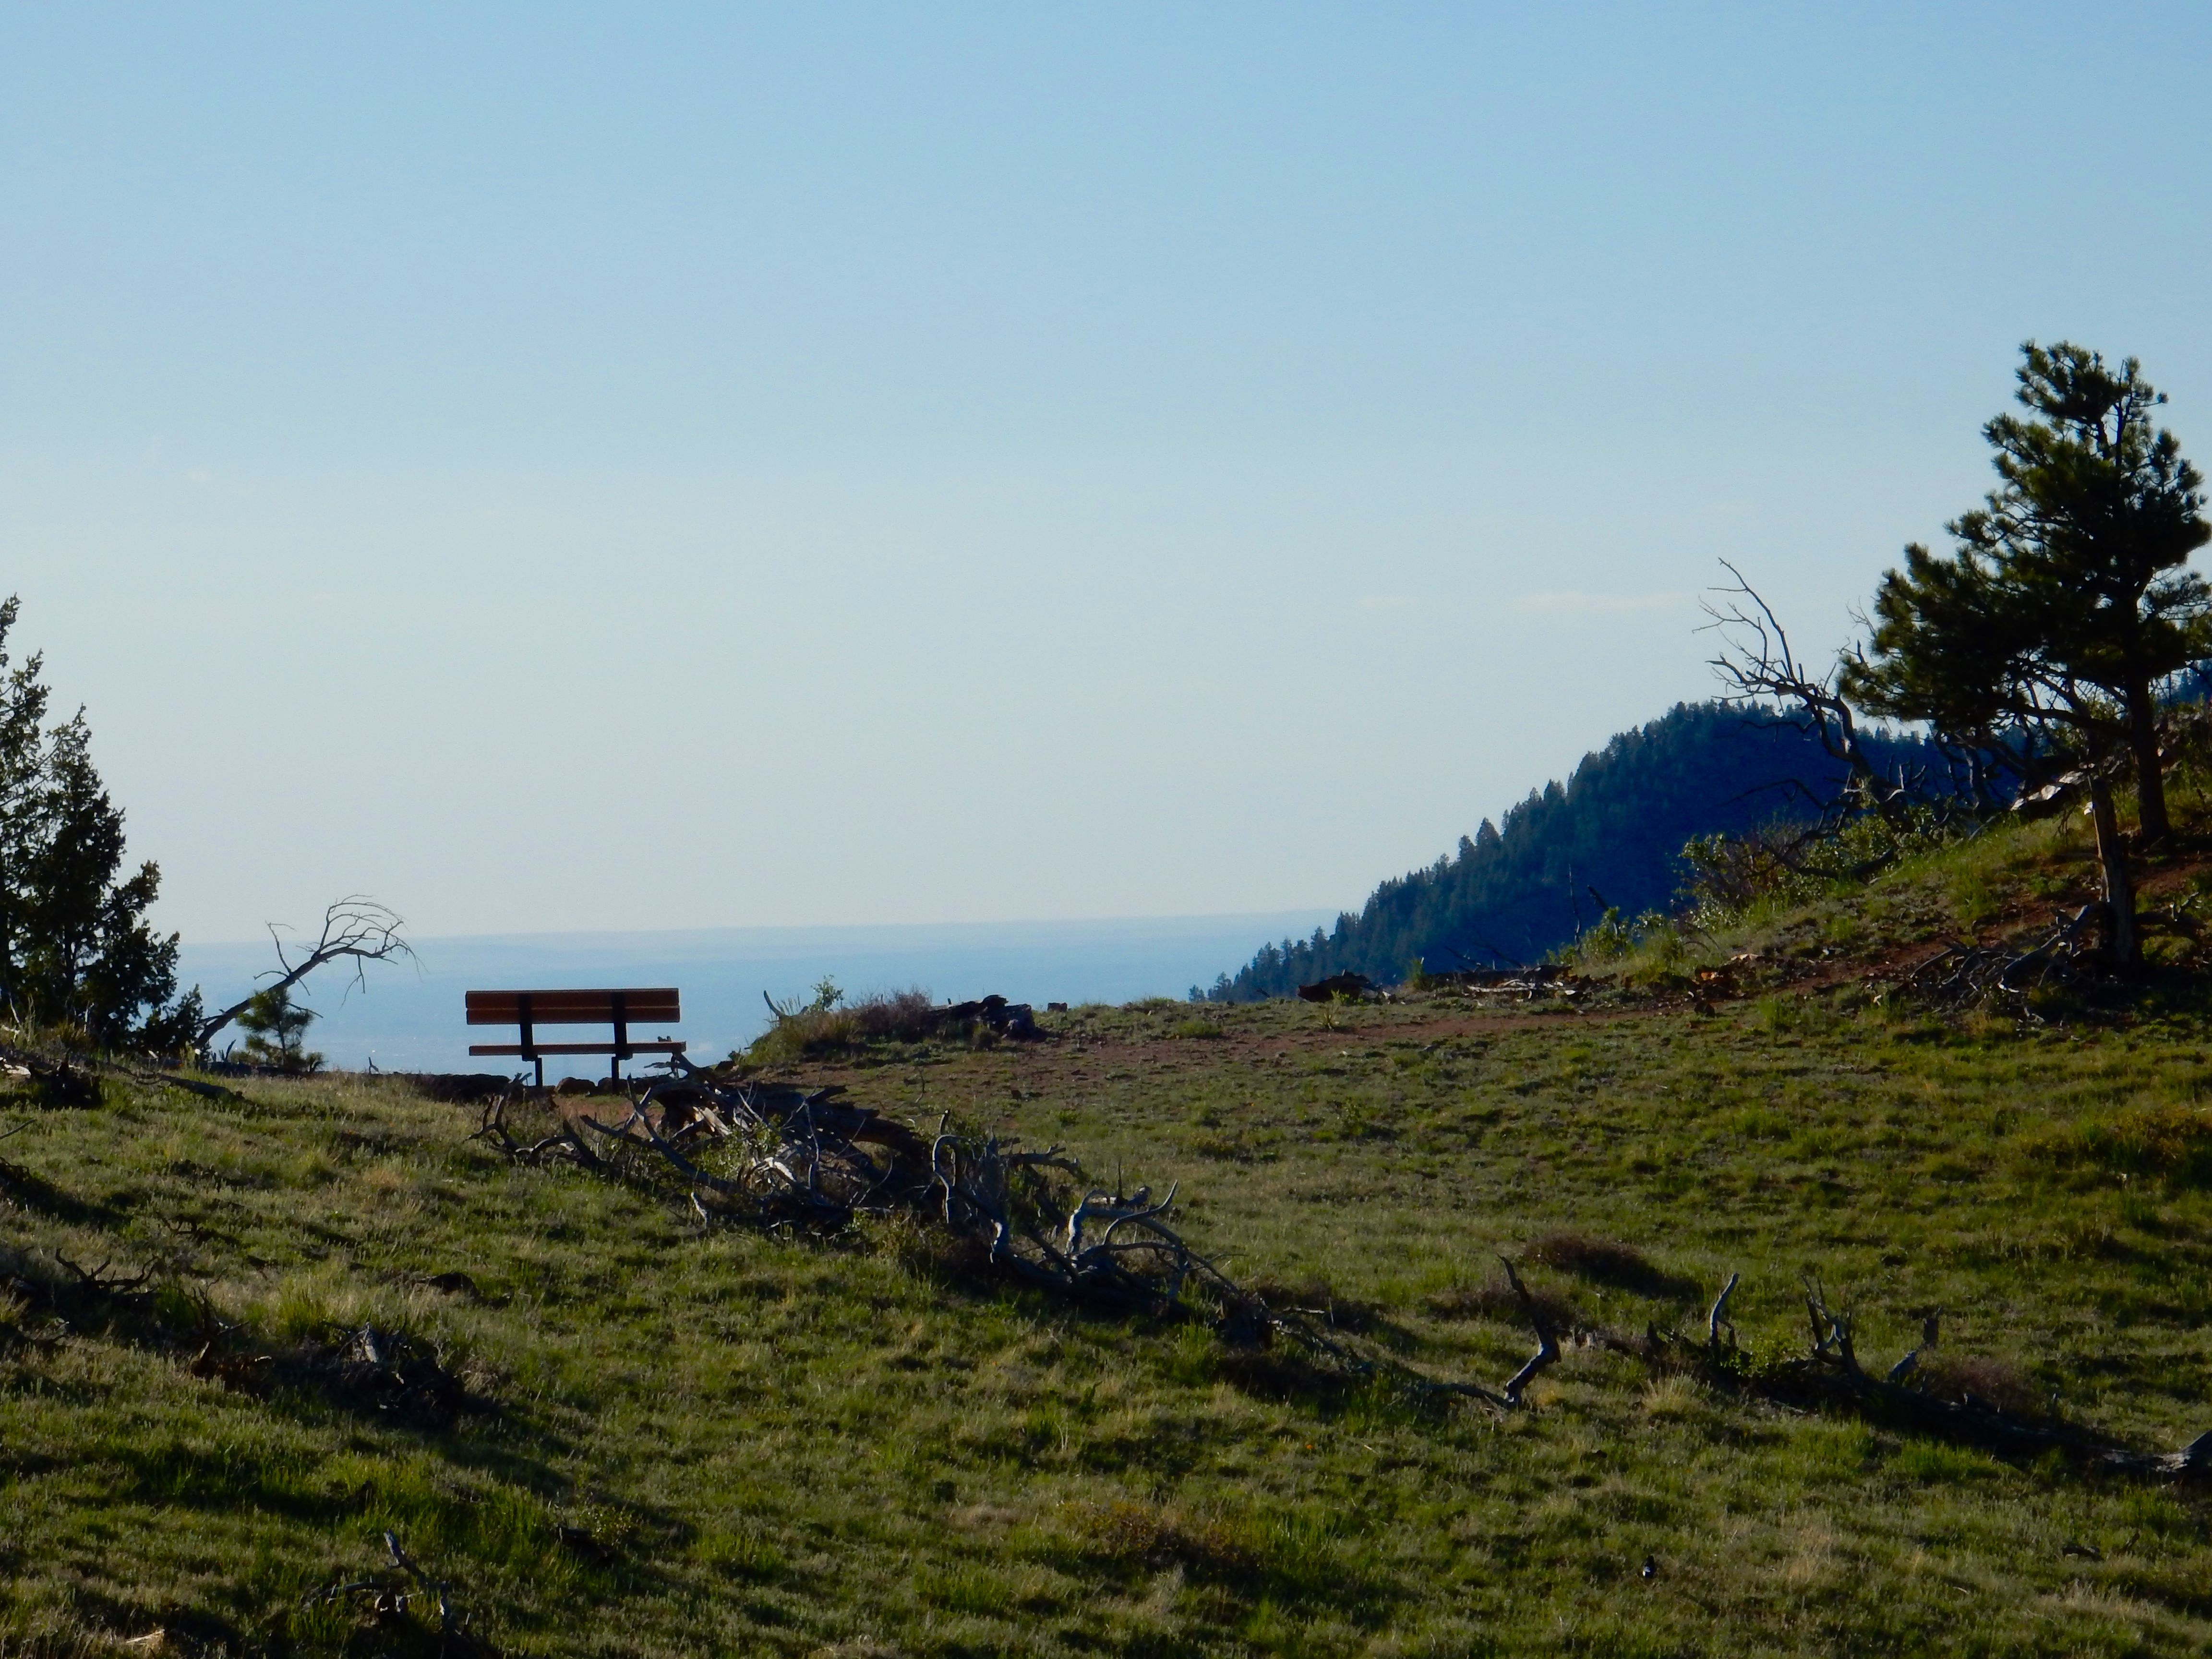 Bench overlooking the valley